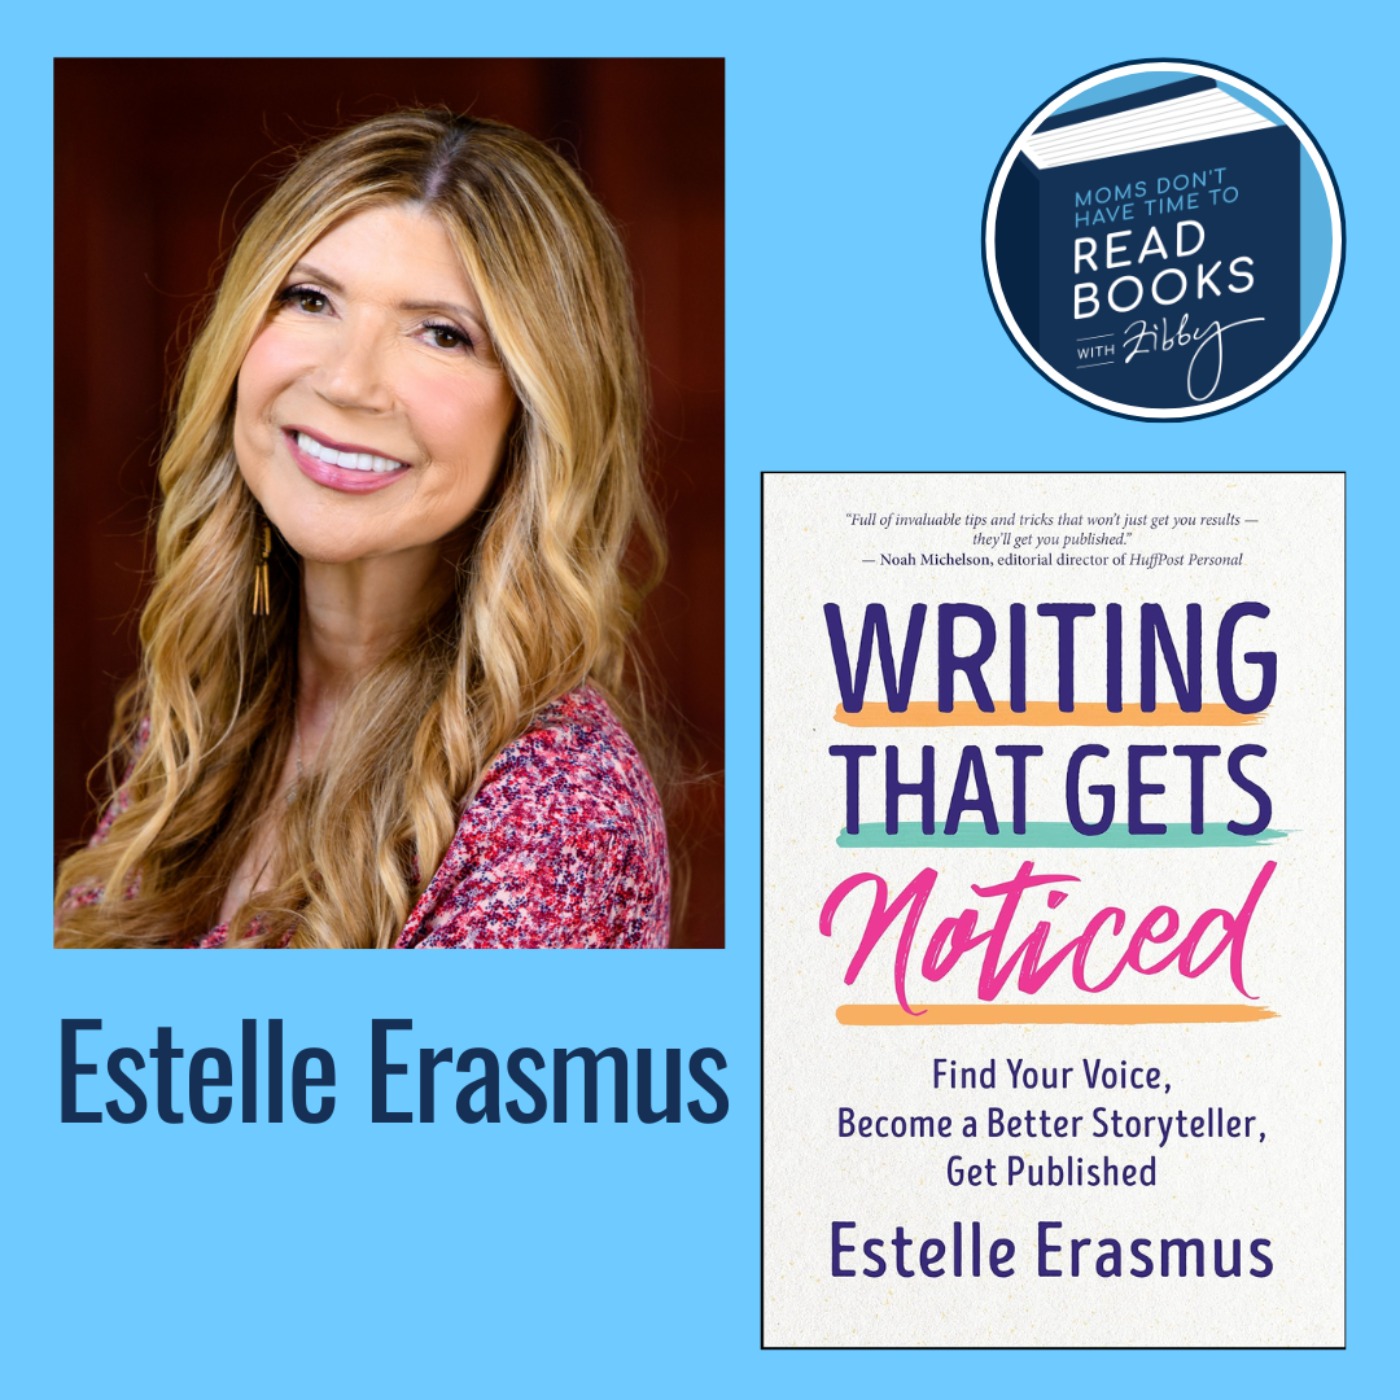 Estelle Erasmus, WRITING THAT GETS NOTICED: Find Your Voice, Become a Better Storyteller, Get Published